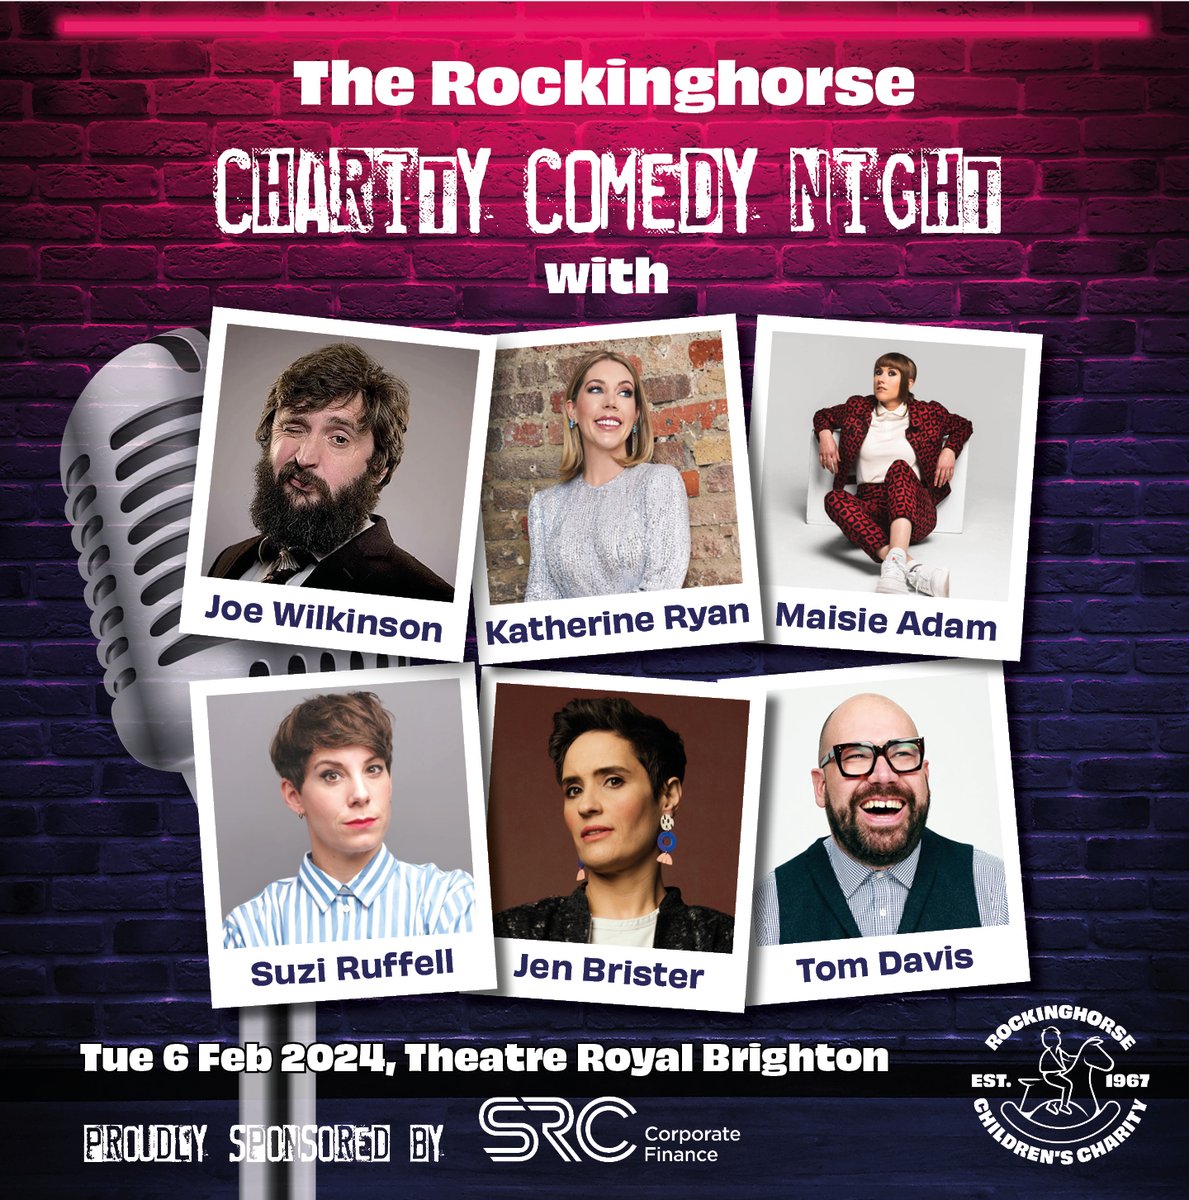 🎊 We are thrilled to announce our first-ever Charity Comedy Night! @ATGTICKETS. Sponsored by @SRCAdvisoryLtd, the evening will include performances by top comedians - @gillinghamjoe, @Kathbum, @MaisieAdam, @suziruffell, Jen Brister & @BigTomD. 📷Tickets go on sale on Thursday!